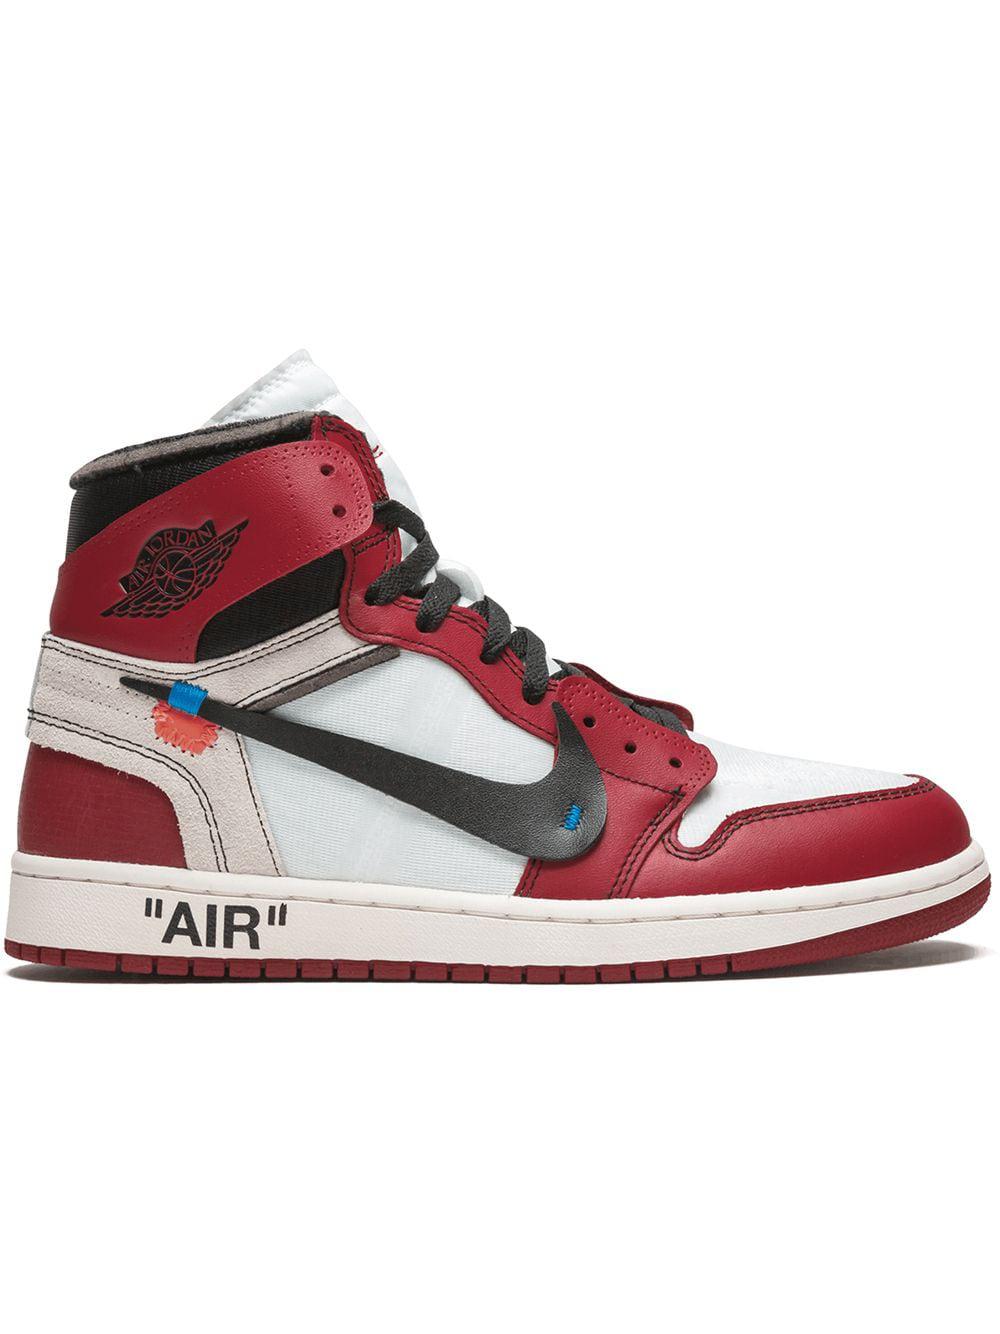 The 10: Air Jordan 1 off-white - Chicago by NIKE X OFF-WHITE | jellibeans